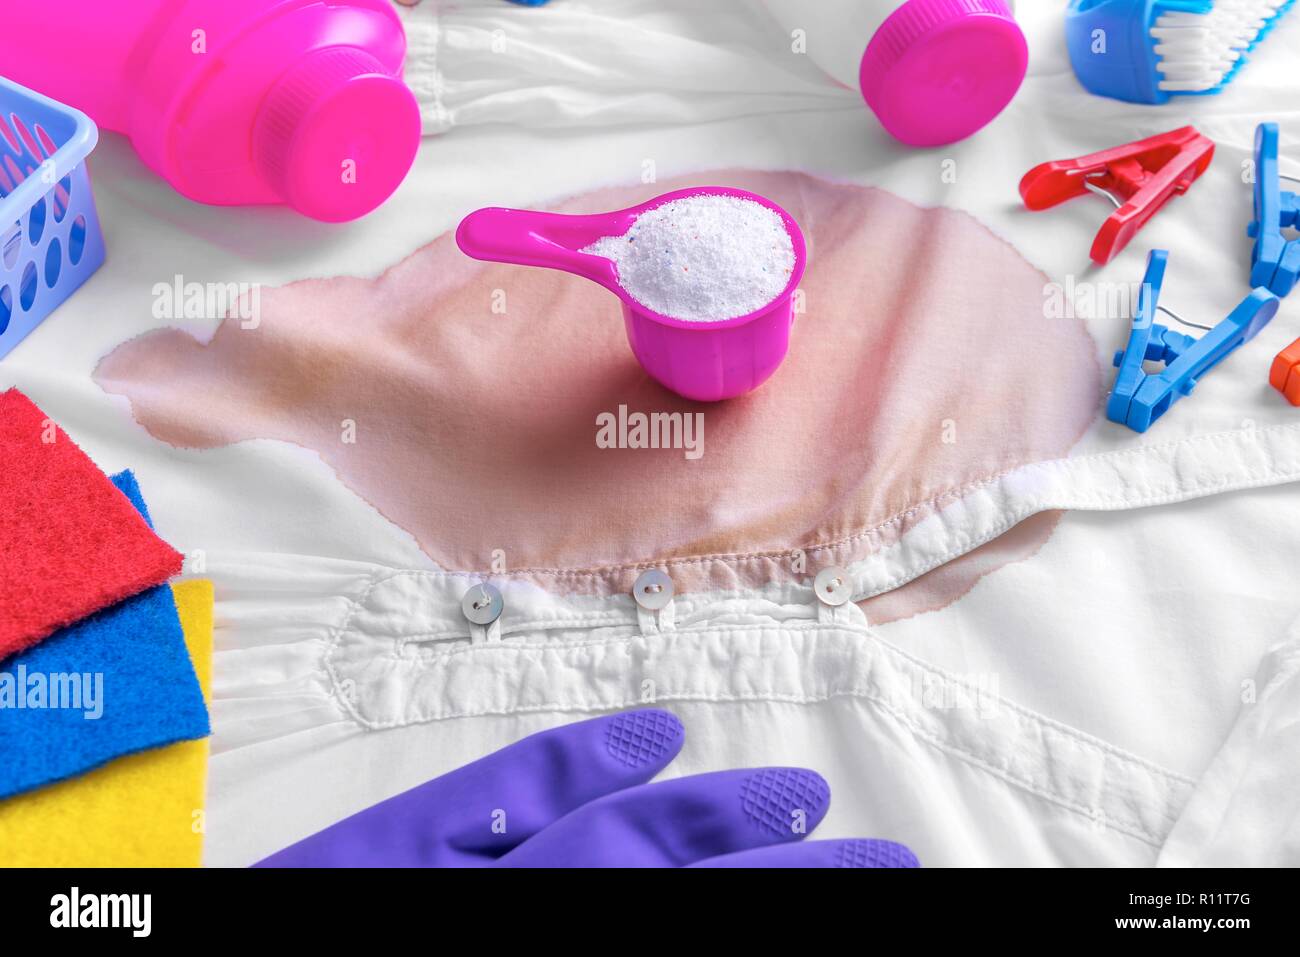 Stain on clothes. Stain removers and other cleaning supplies. Stock Photo